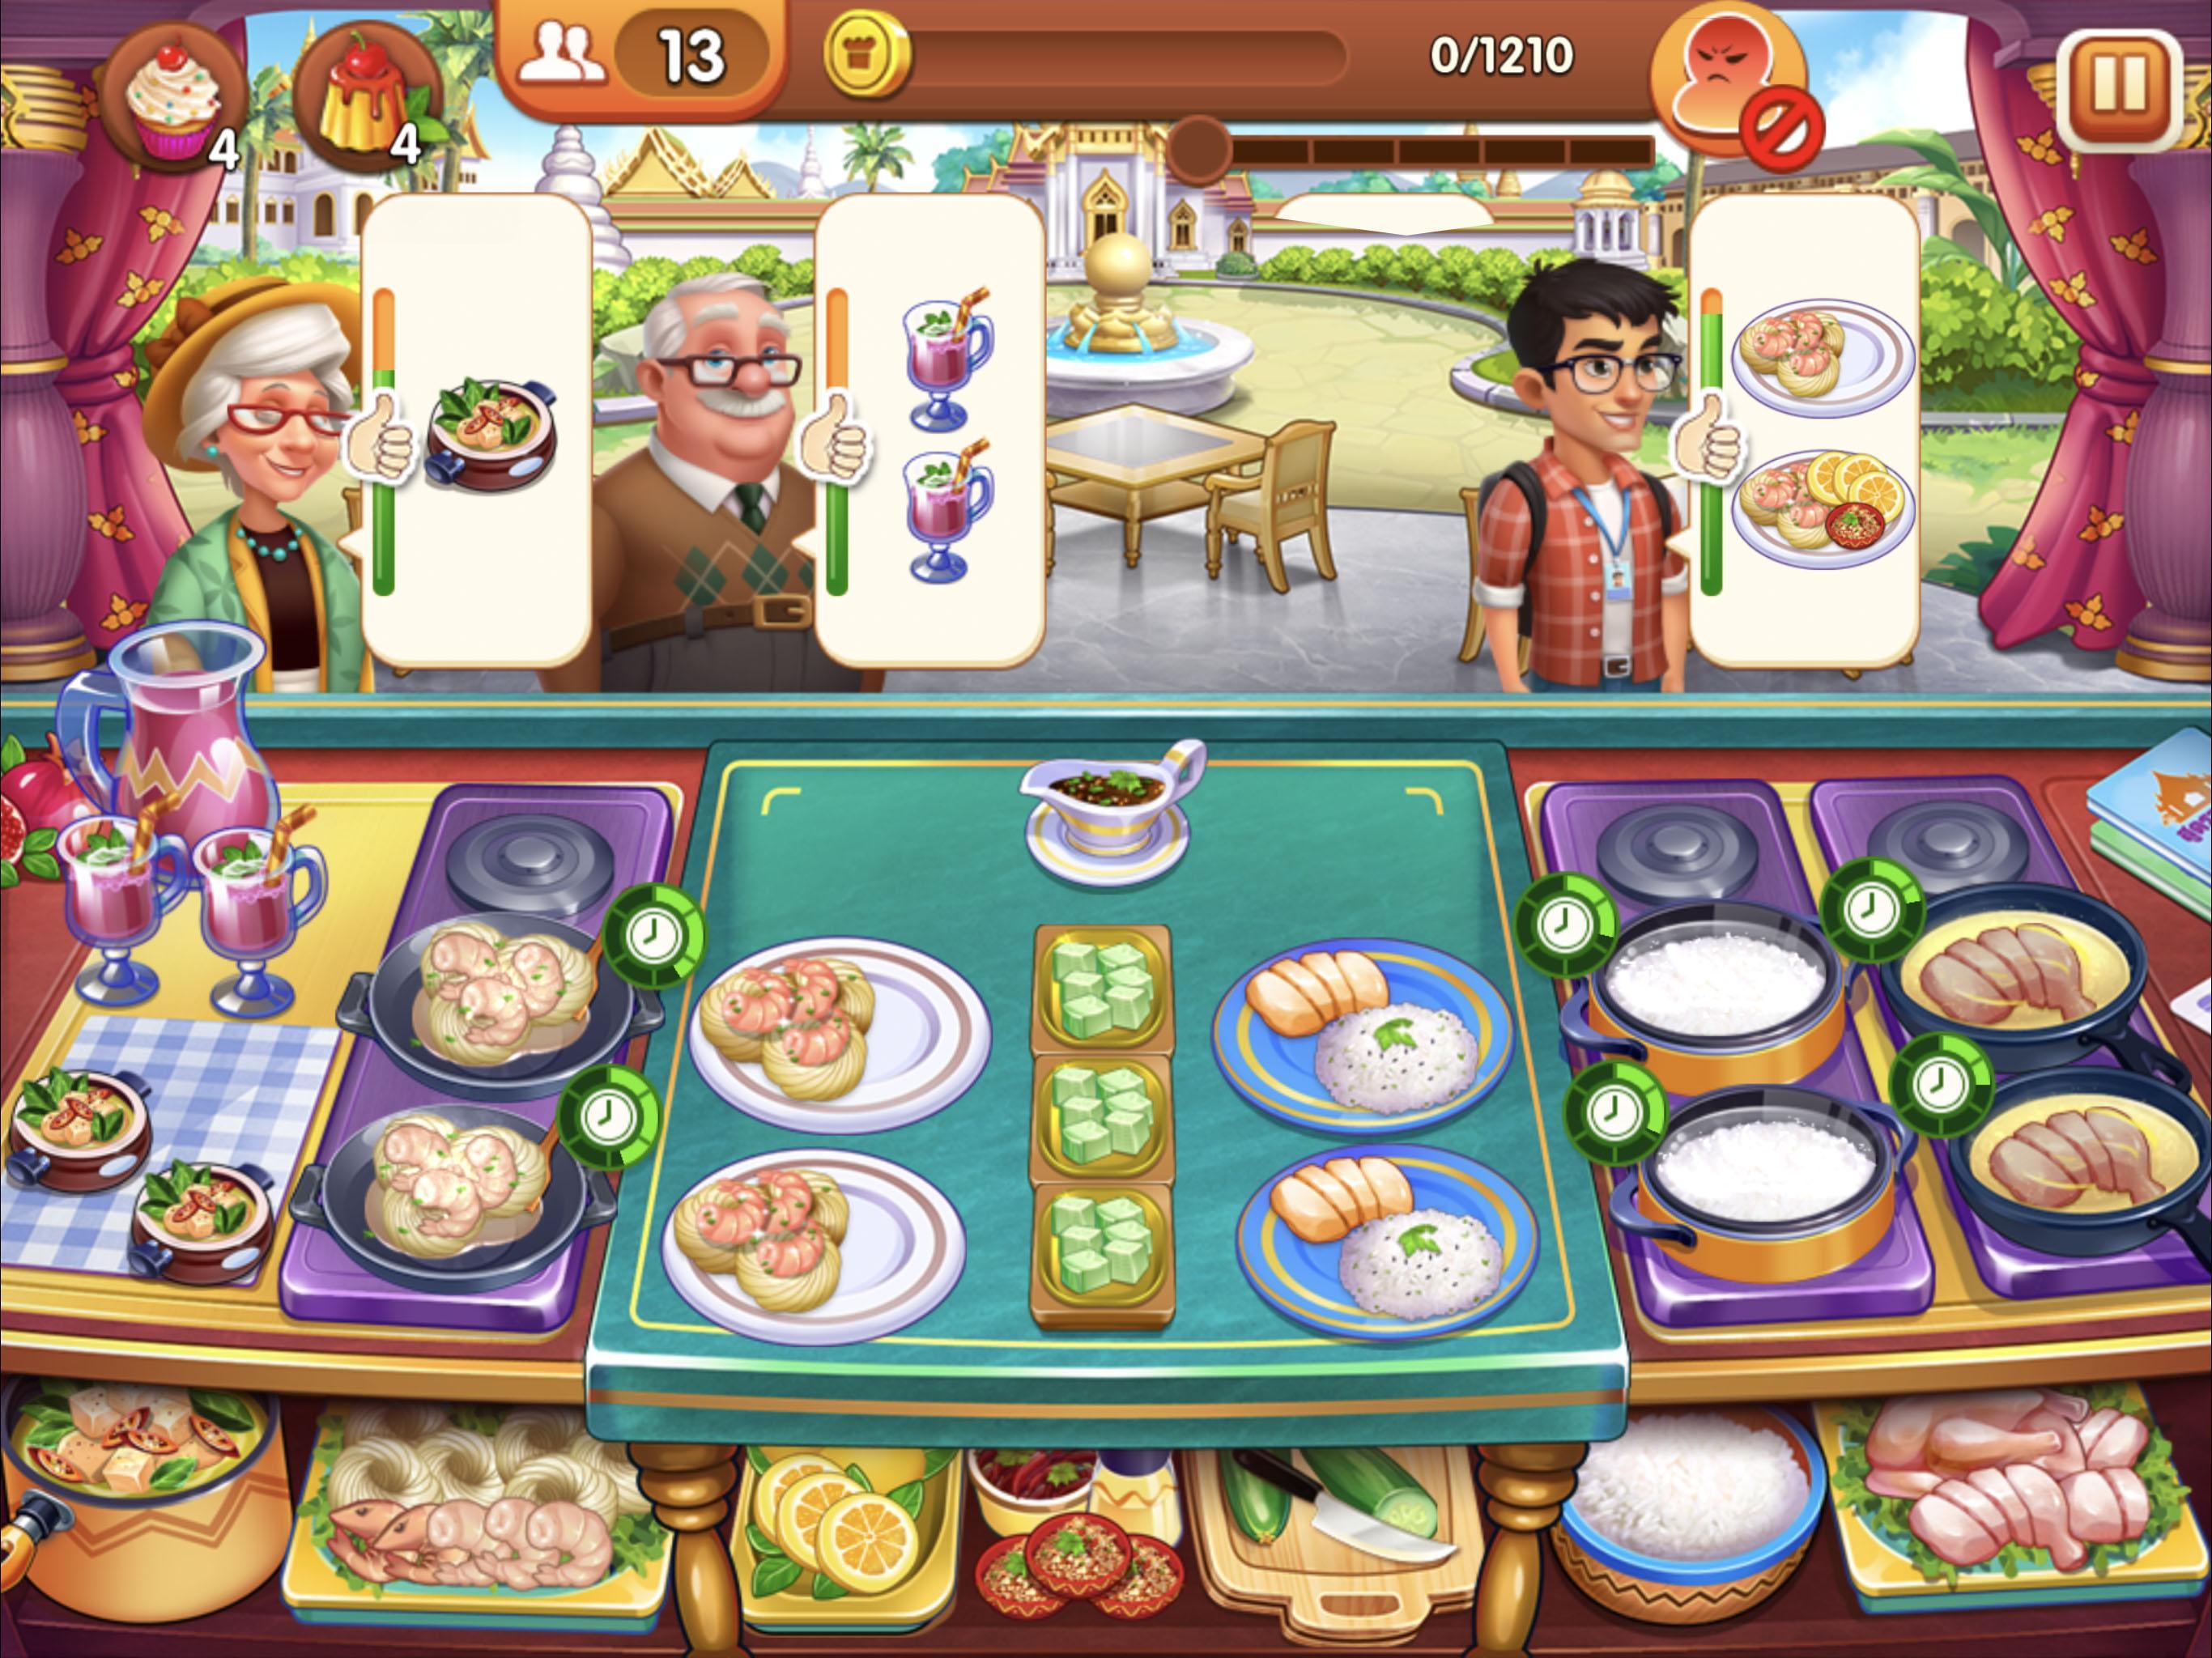 Cooking Madness - A Chef's Restaurant Games 1.7.2 Screenshot 15